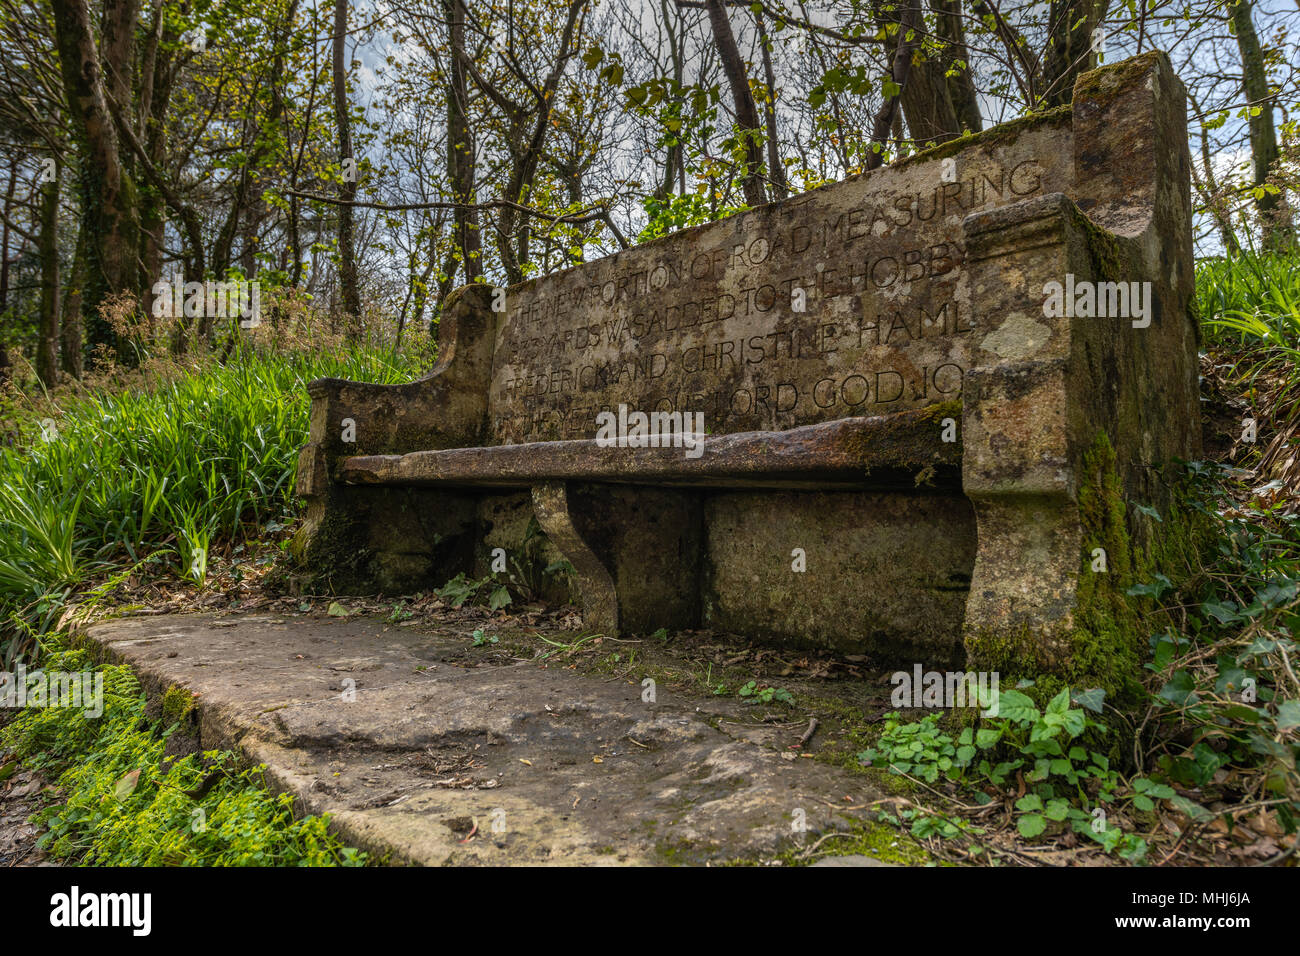 A commemorative stone seat on the Hobby Walk, part of the Clovelly Estate, celebrates the opening of a new 833yard stretch of the path in 1901 which i Stock Photo